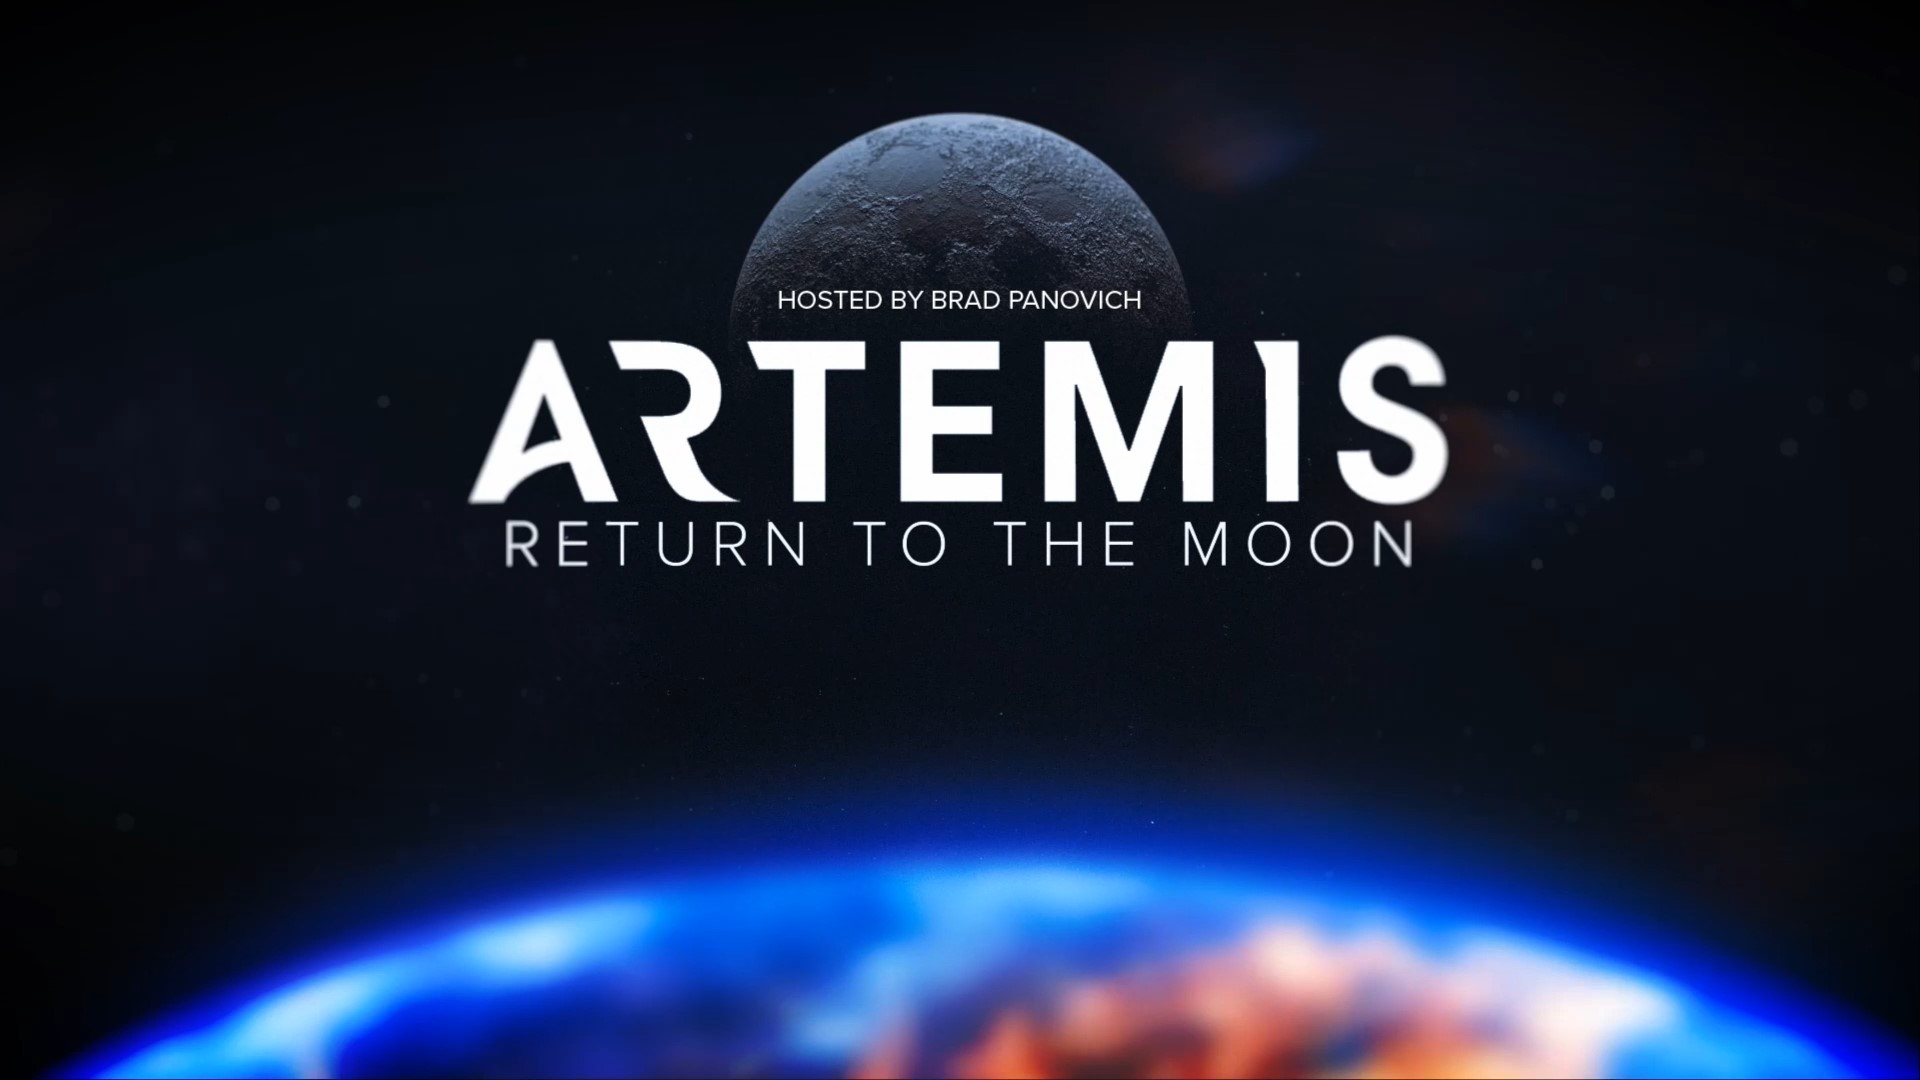 Despite the launch getting scrubbed, Brad Panovich explores the Artemis mission and how NASA intends to return humans to the moon by 2024.